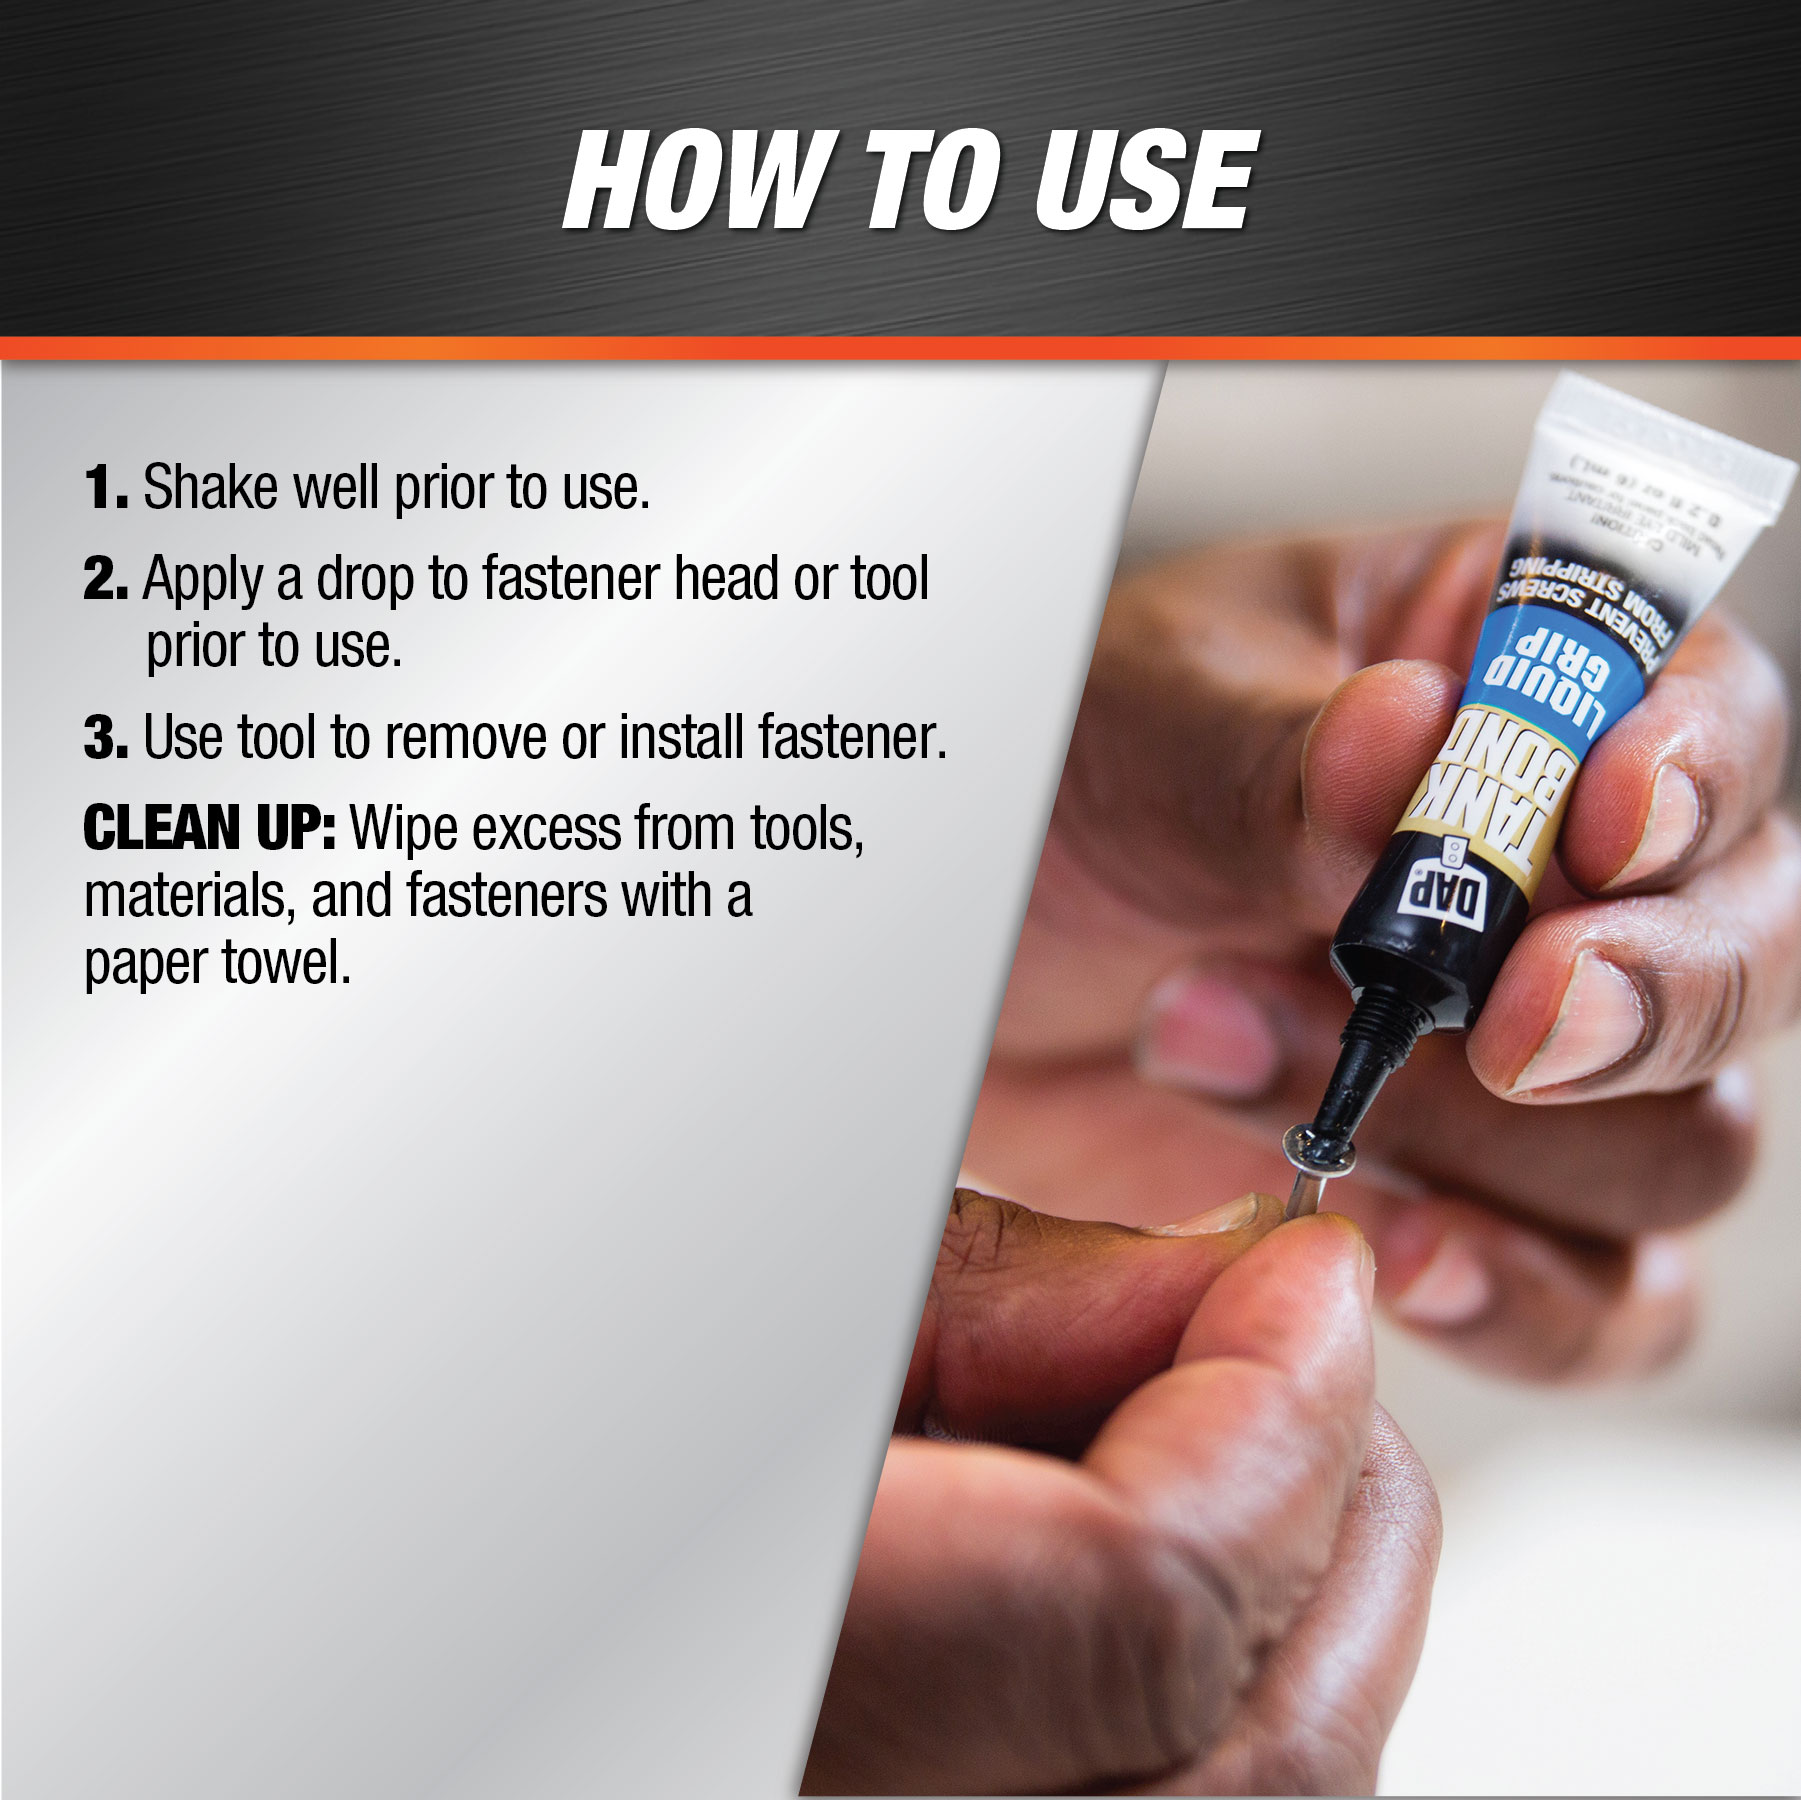 Quick Grip Glue: This one is quick-bond, supposed to adhere  anything-to-anything and be water and weatherproof. Going to try this on…